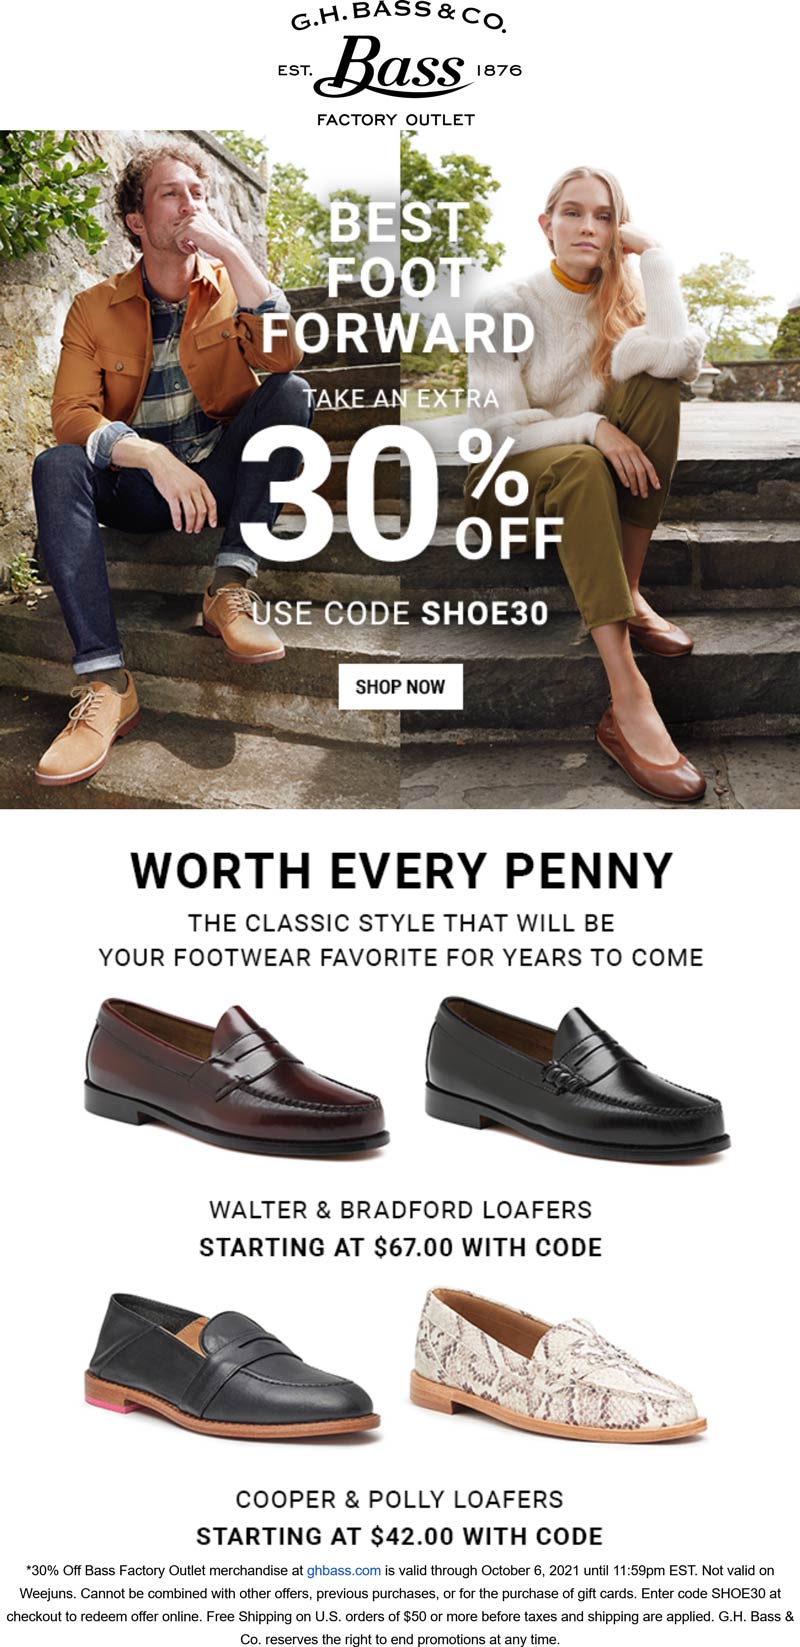 Bass Factory Outlet stores Coupon  30% off penny loafers at Bass Factory Outlet via promo code SHOE30 #bassfactoryoutlet 